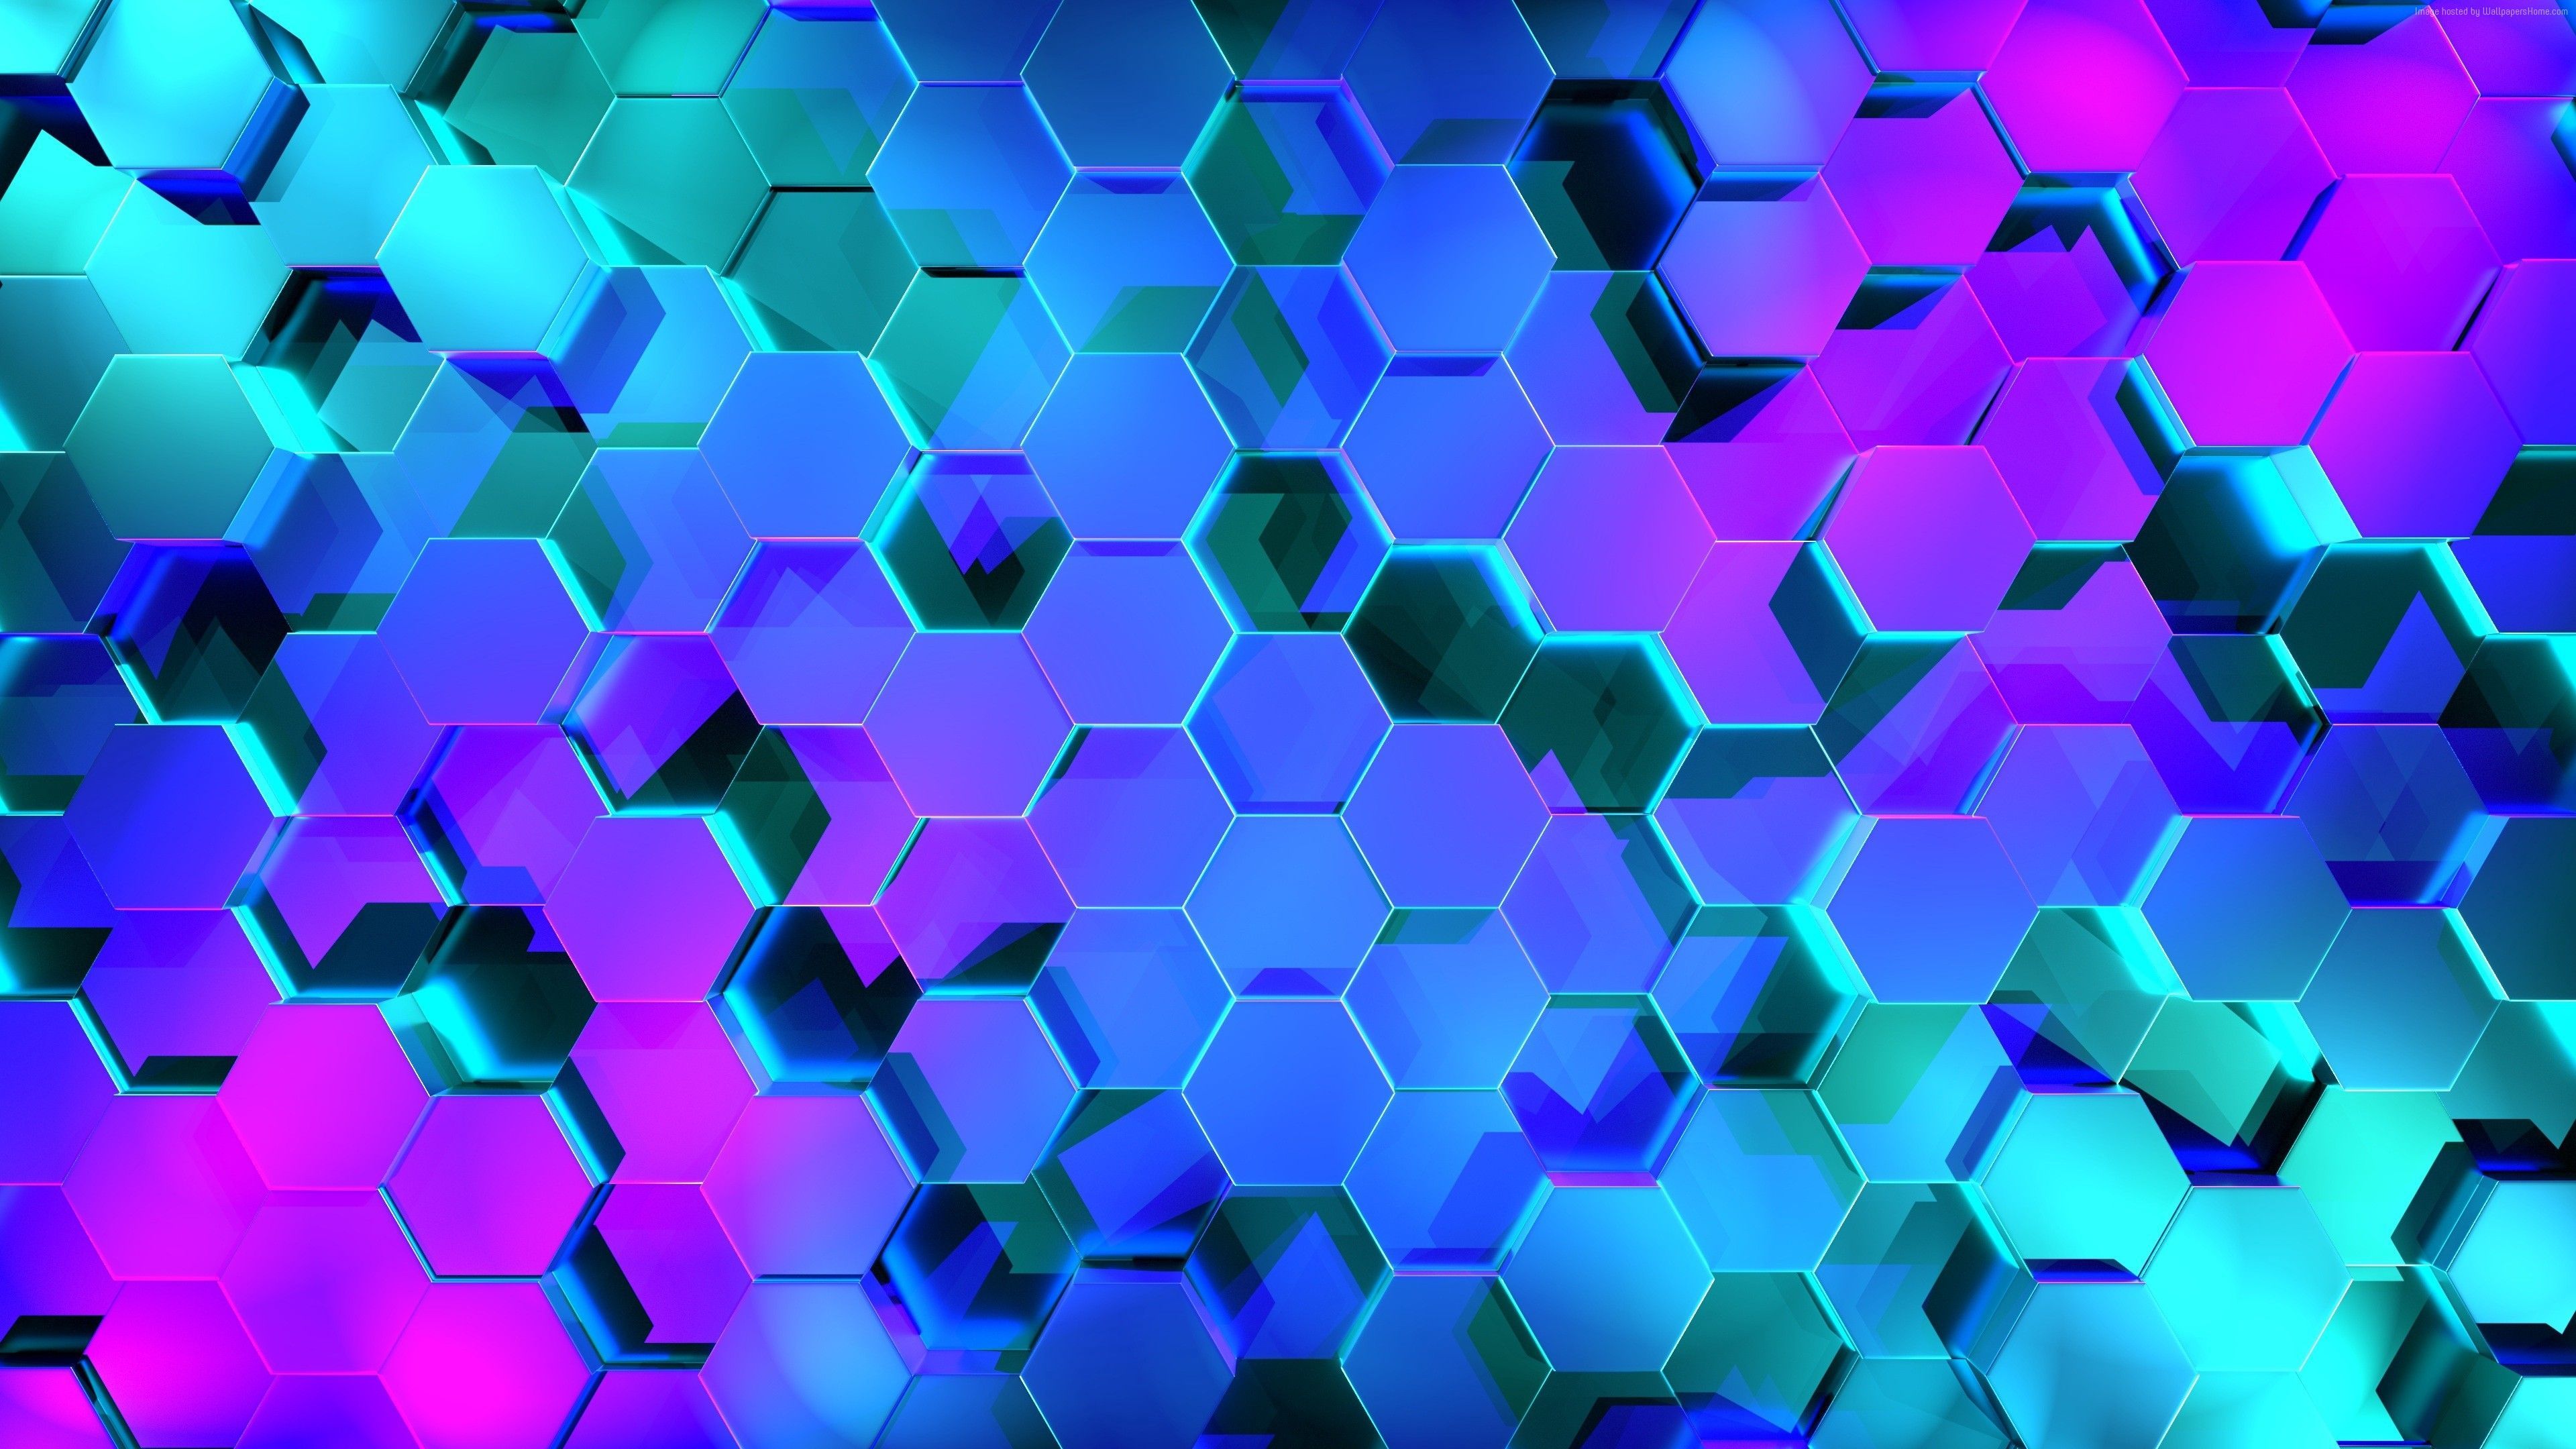 Wallpaper Geometry, Hexagon, Colors, 3D, 4K, Abstract / Wallpaper Geom. Hexagon Wallpaper, Pattern Wallpaper, Background Image Wallpaper